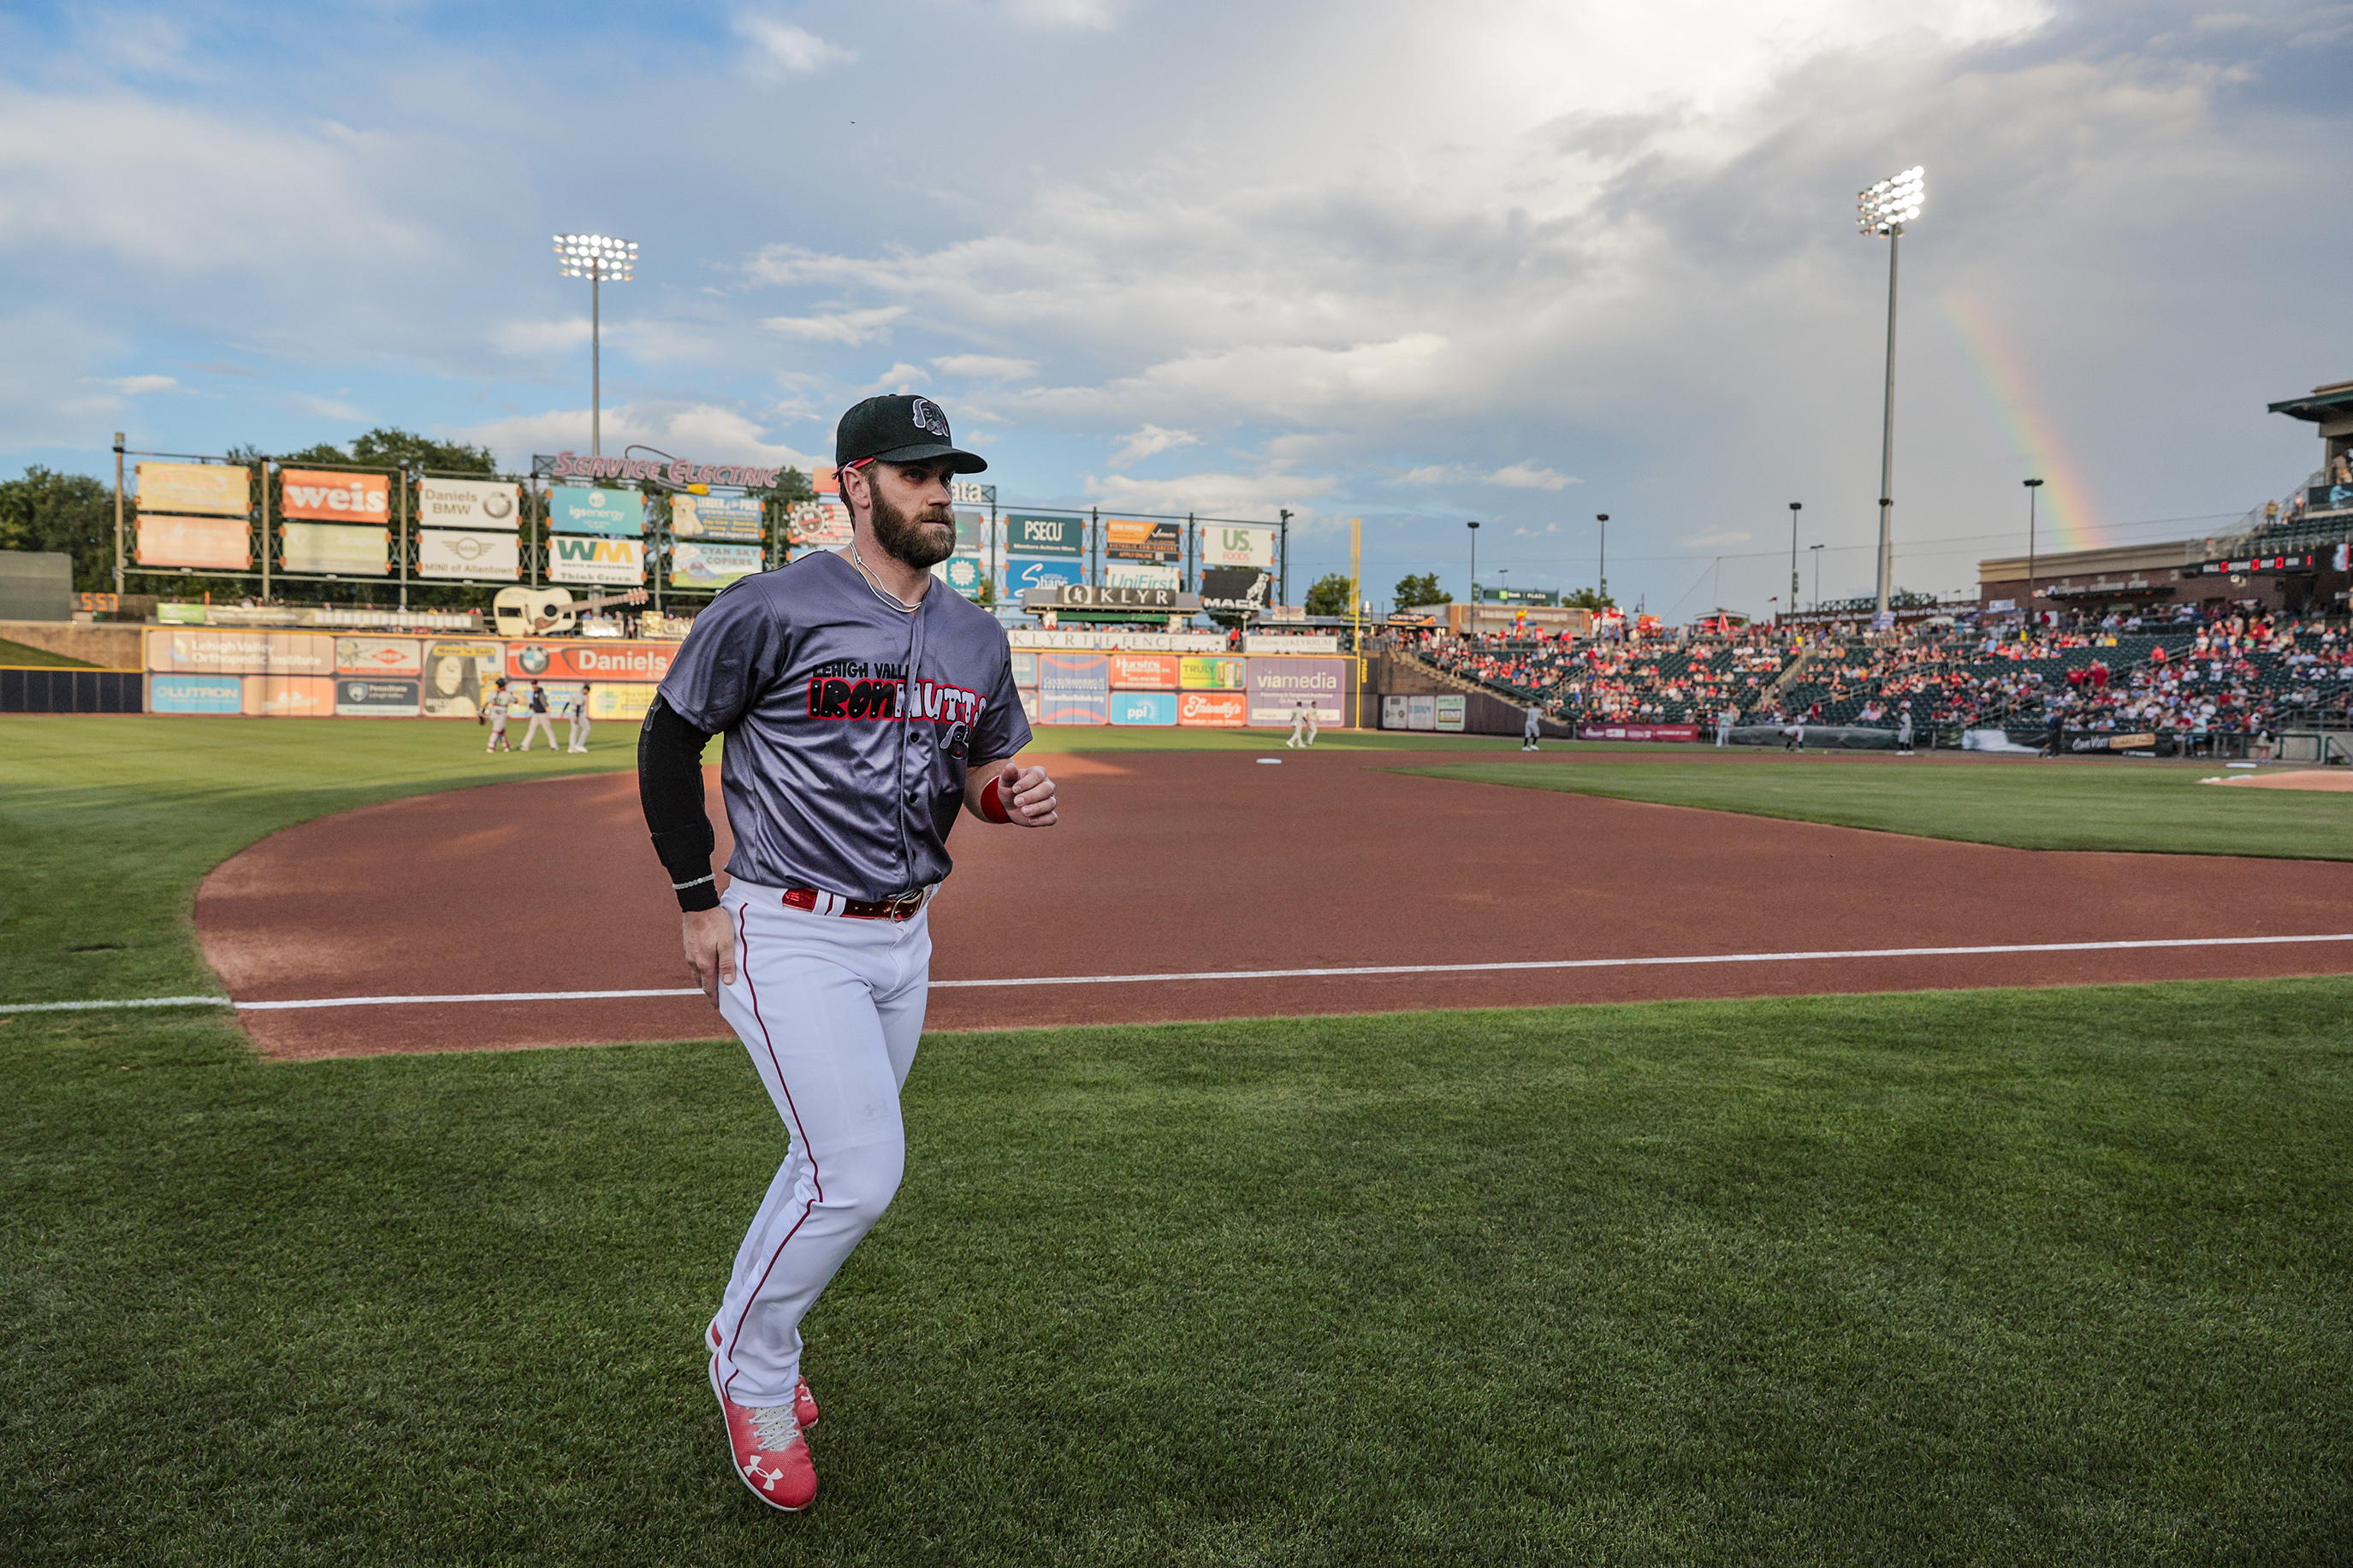 Bryce Harper down on the farm: Phillies star's rehab assignment a boon for  Triple-A IronPigs - The Athletic